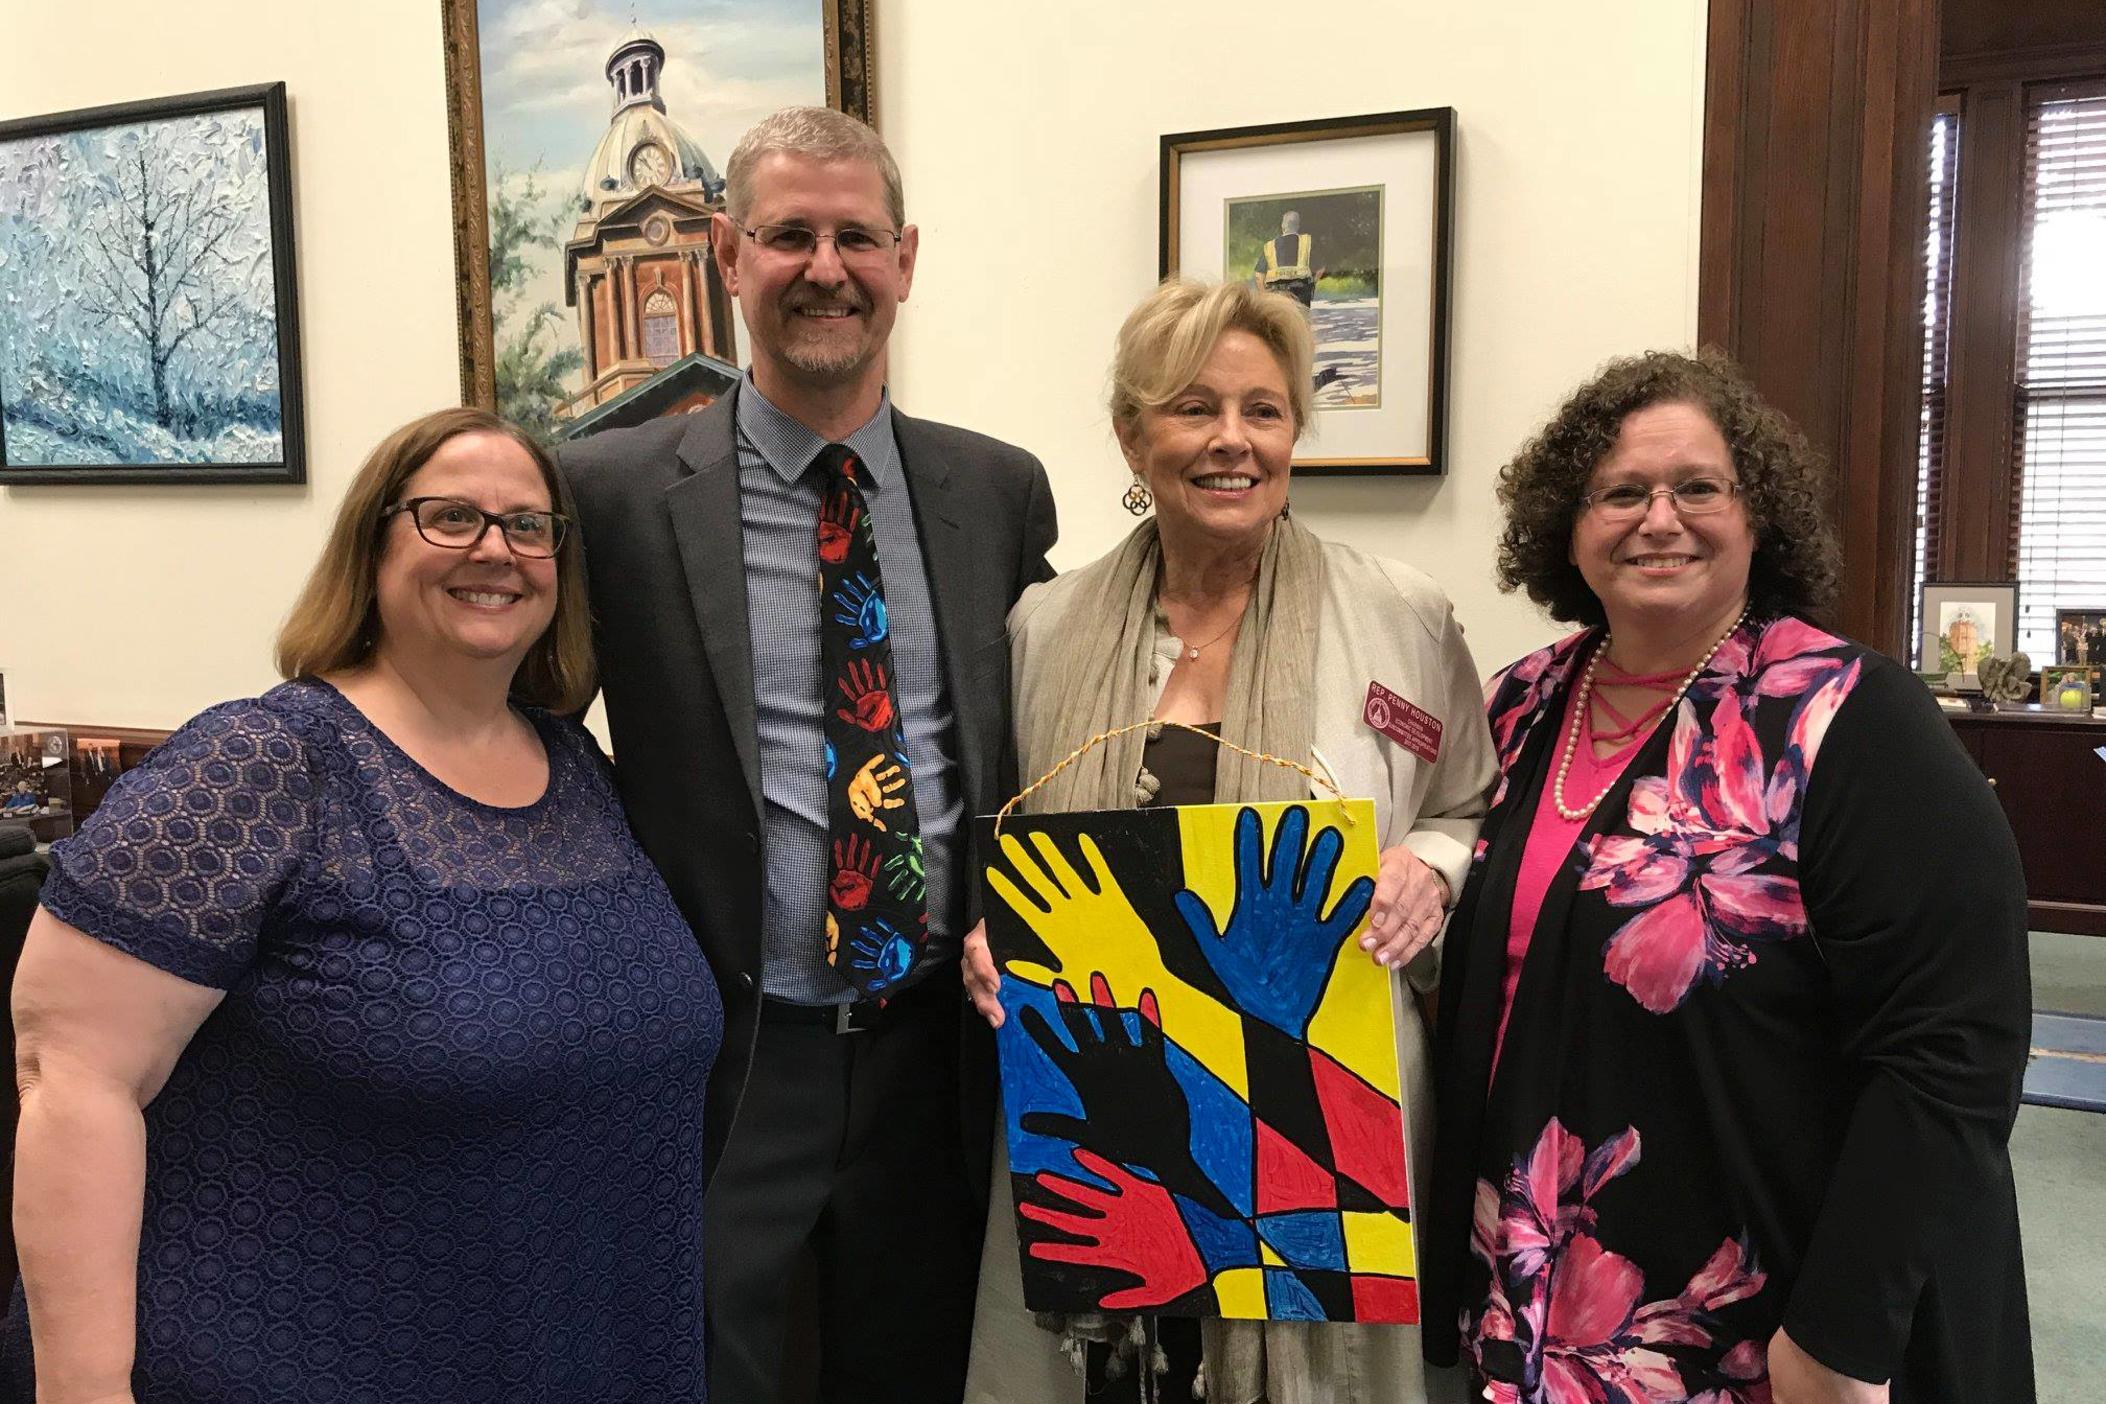 Jimmy Peterson, executive director of the Georgia Center for the Deaf and Hard of Hearing, stands with three women. Everyone is smiling. One woman stands to the left of Jimmy, and she holds a painting of hands in the colors red, yellow and blue.